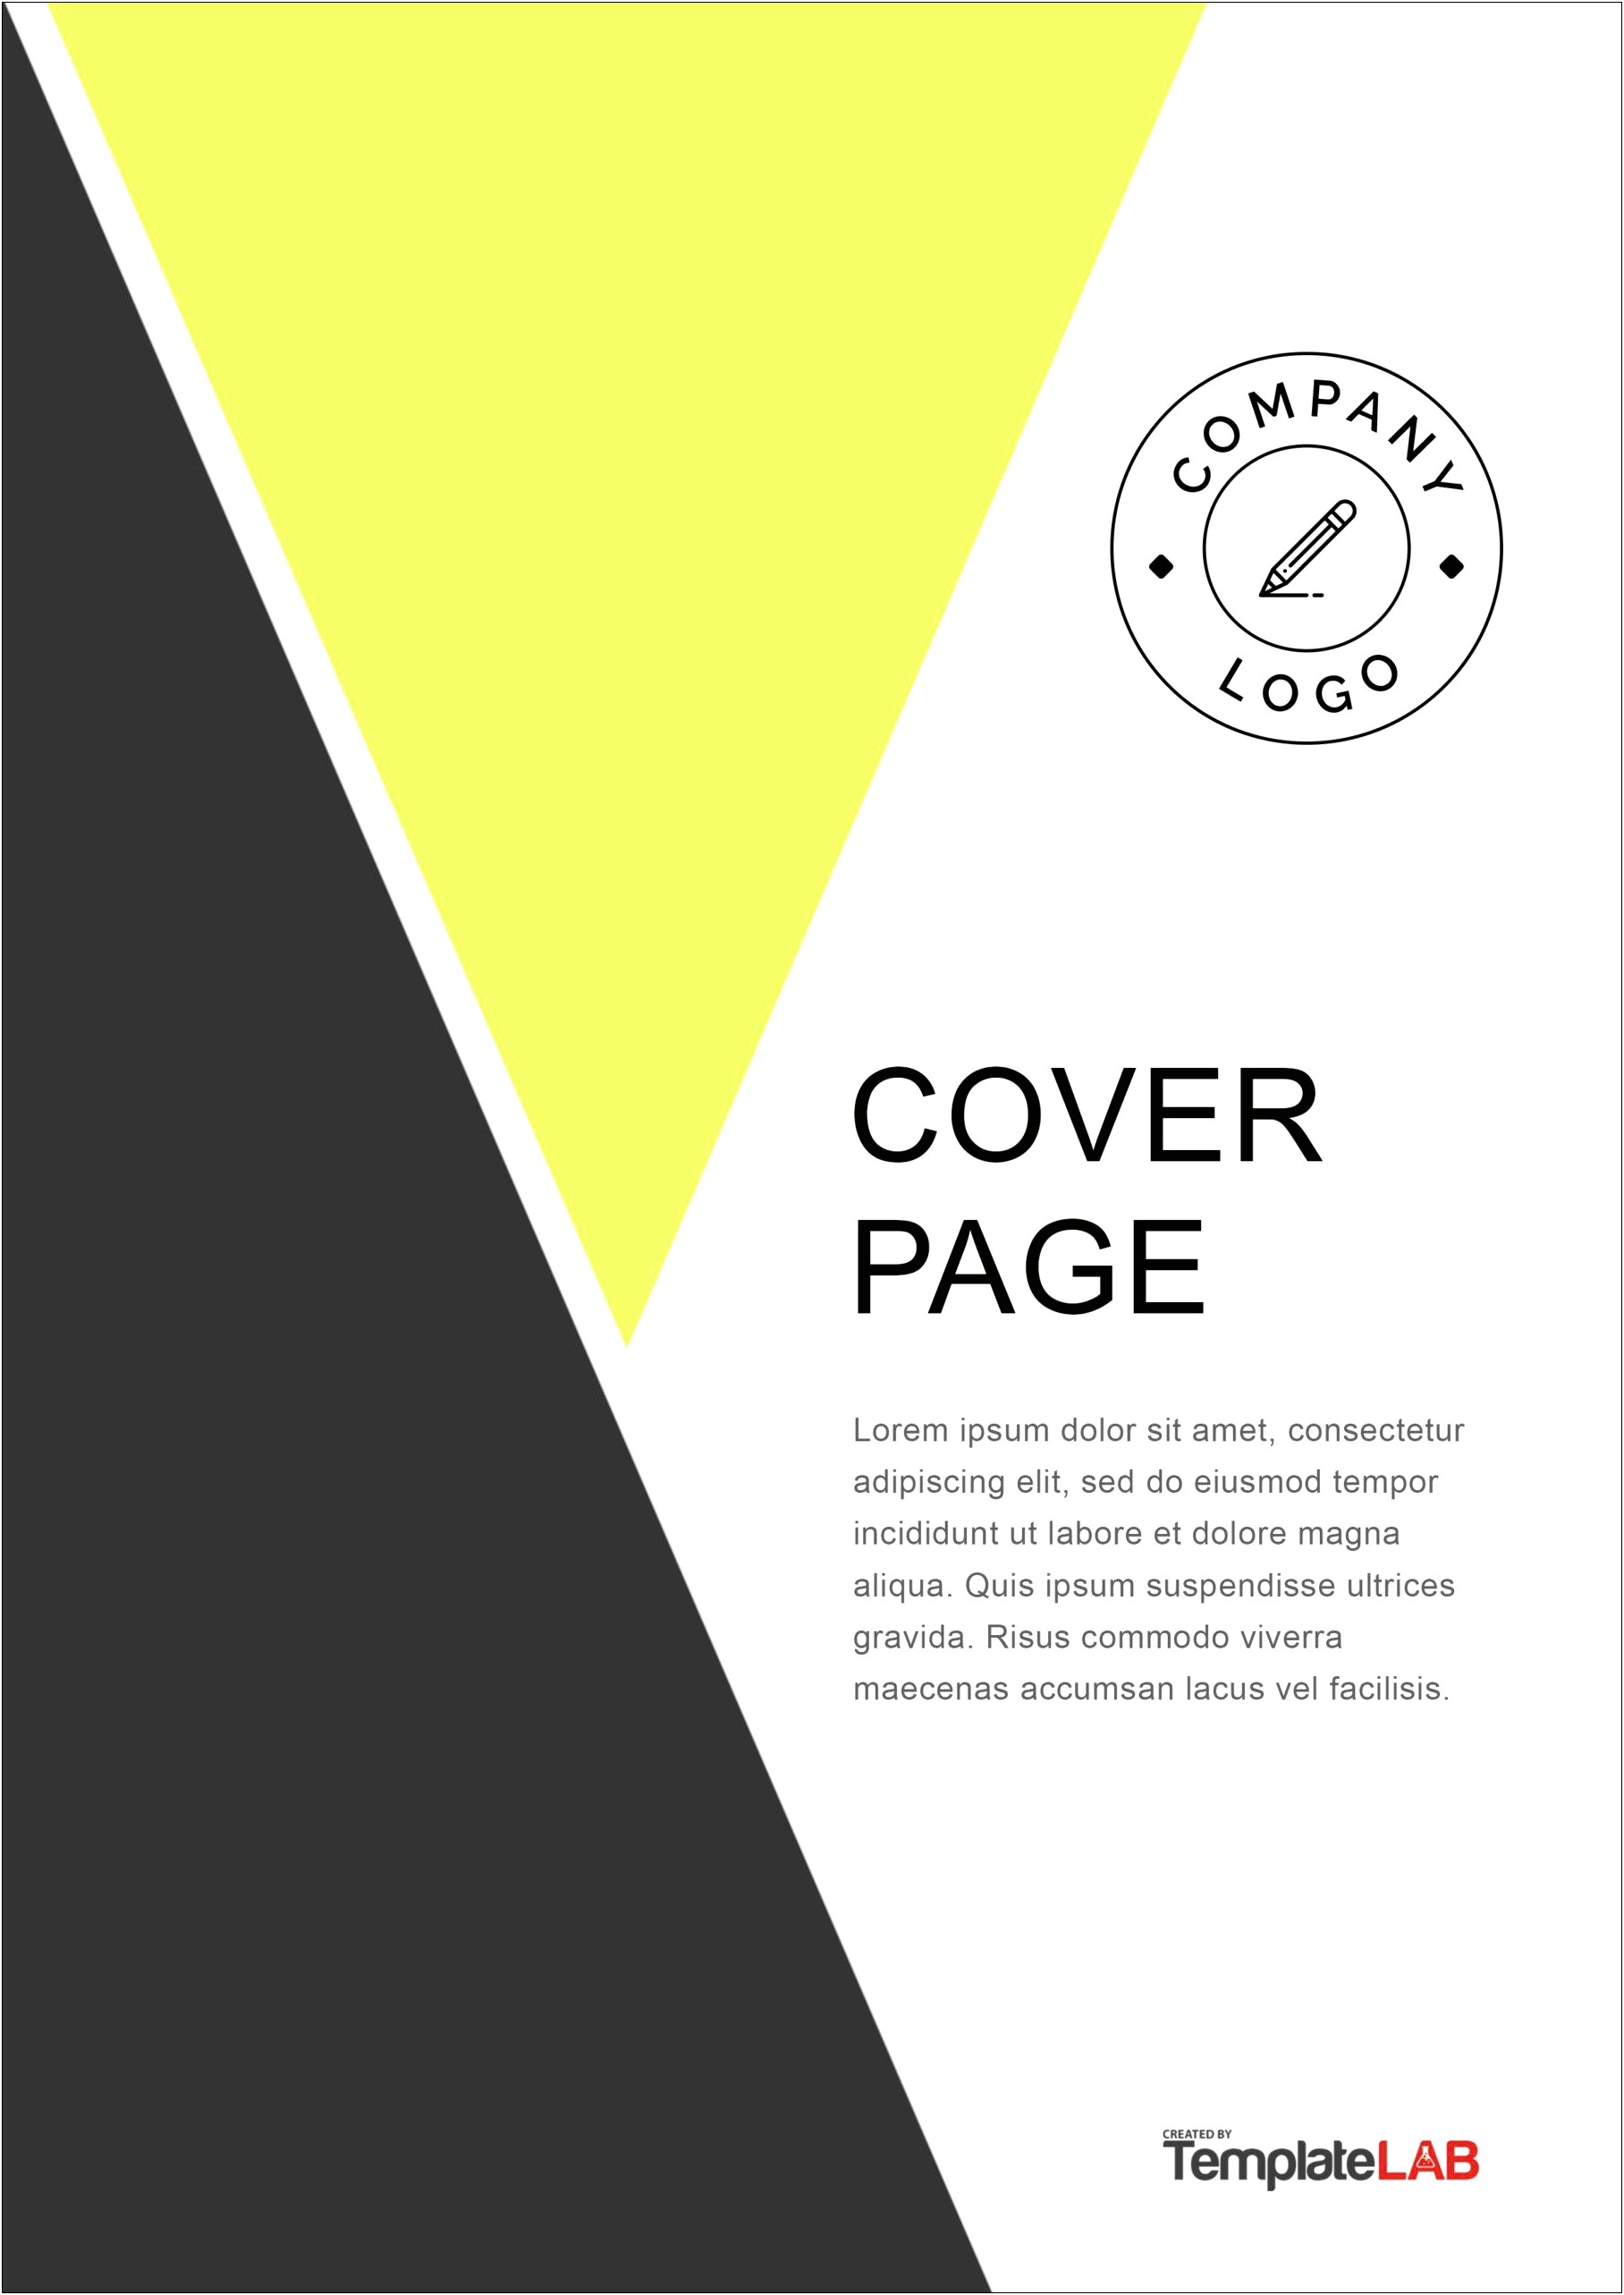 Project Report Cover Page Template Download